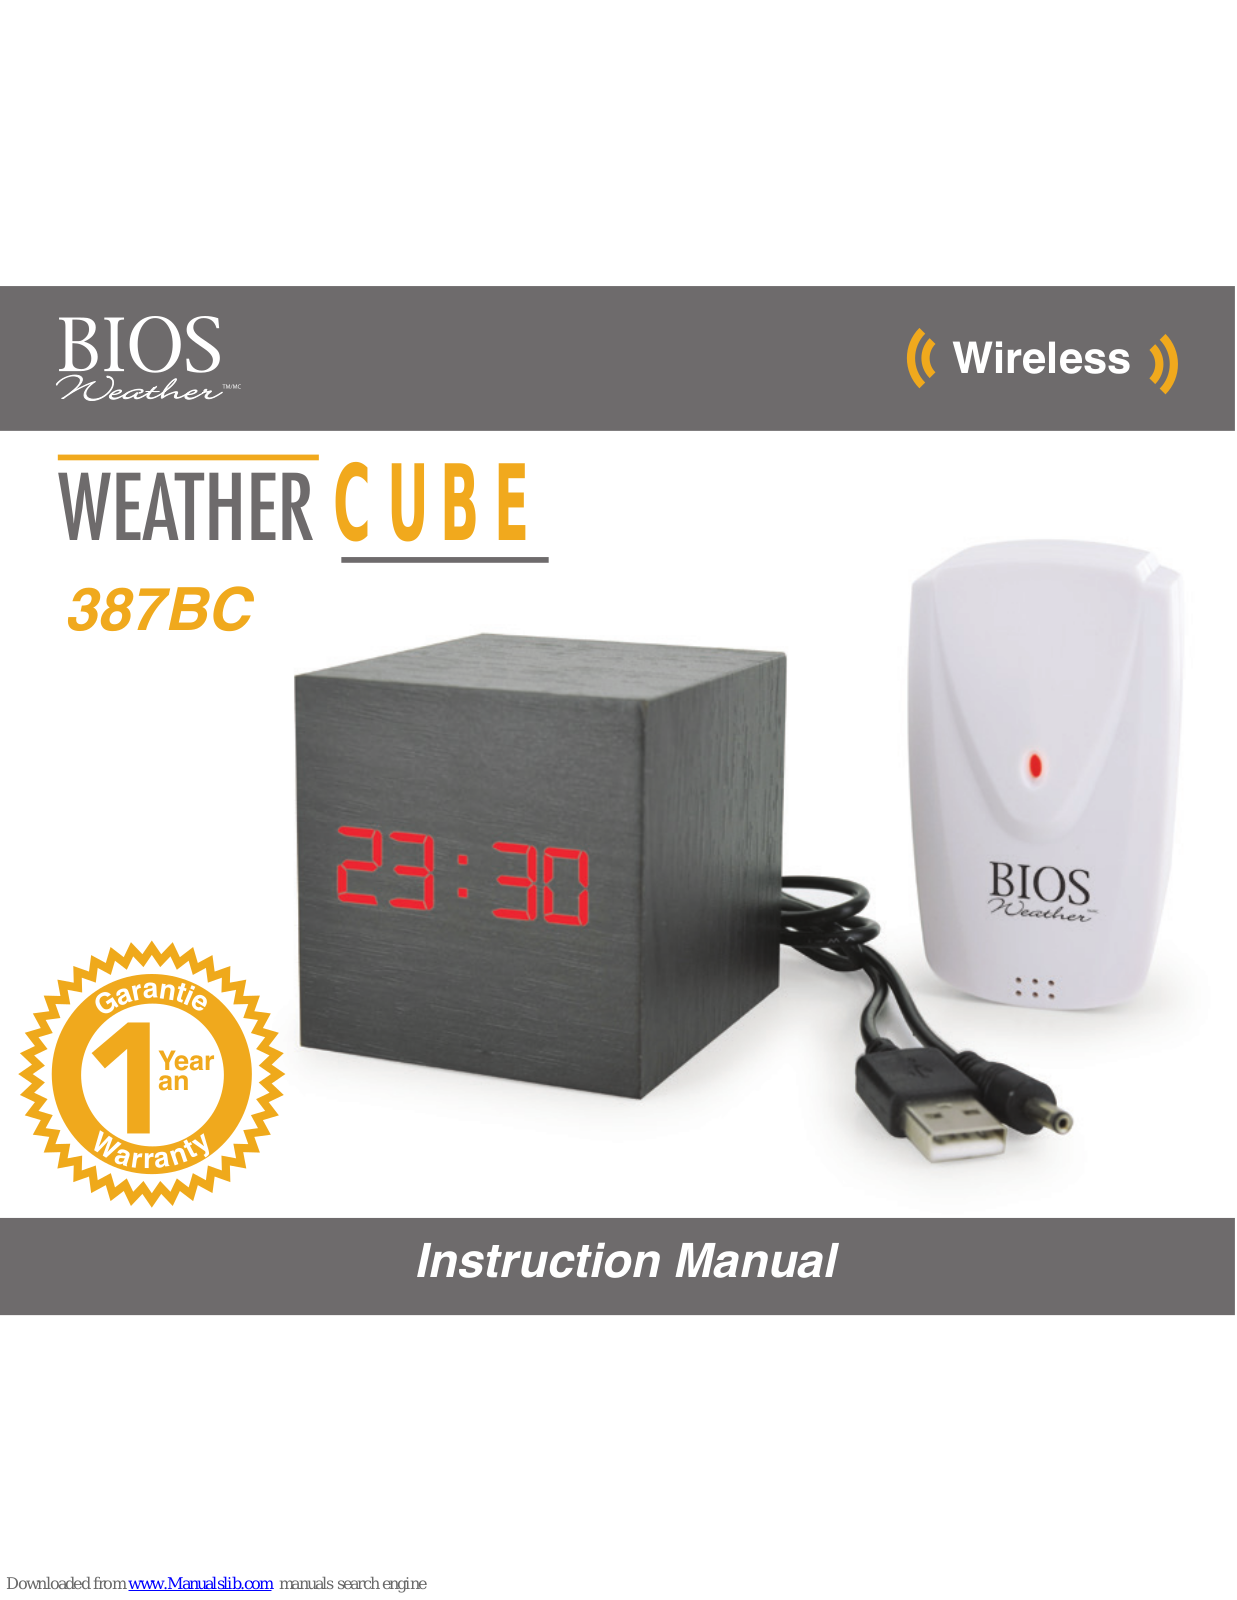 BIOS WEATHER WEATHER CUBE, 387BC Instruction Manual